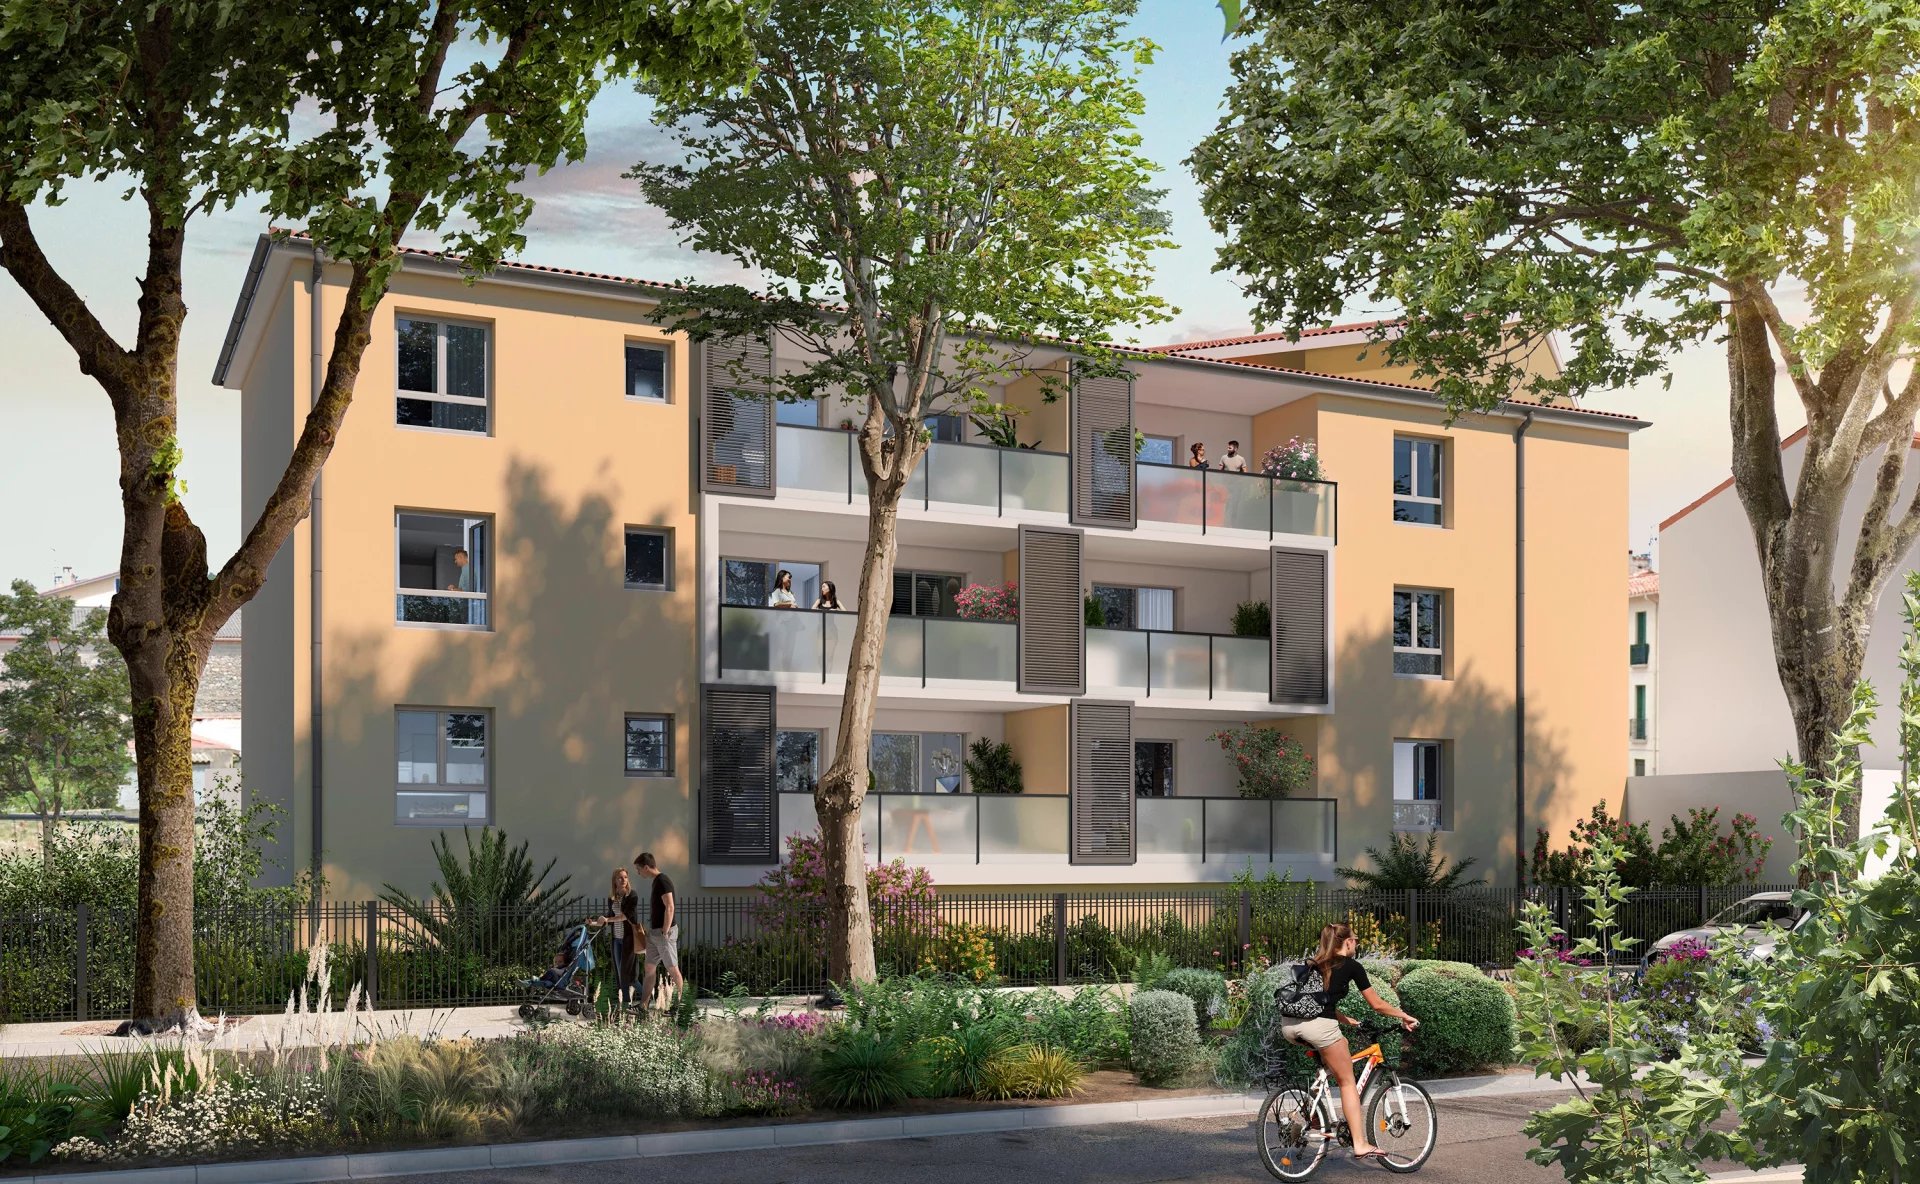 OFF-PLAN 2-BED APPARTMENT (LOT 202), RESIDENCE L'ANGLE DES ARTS, CERET